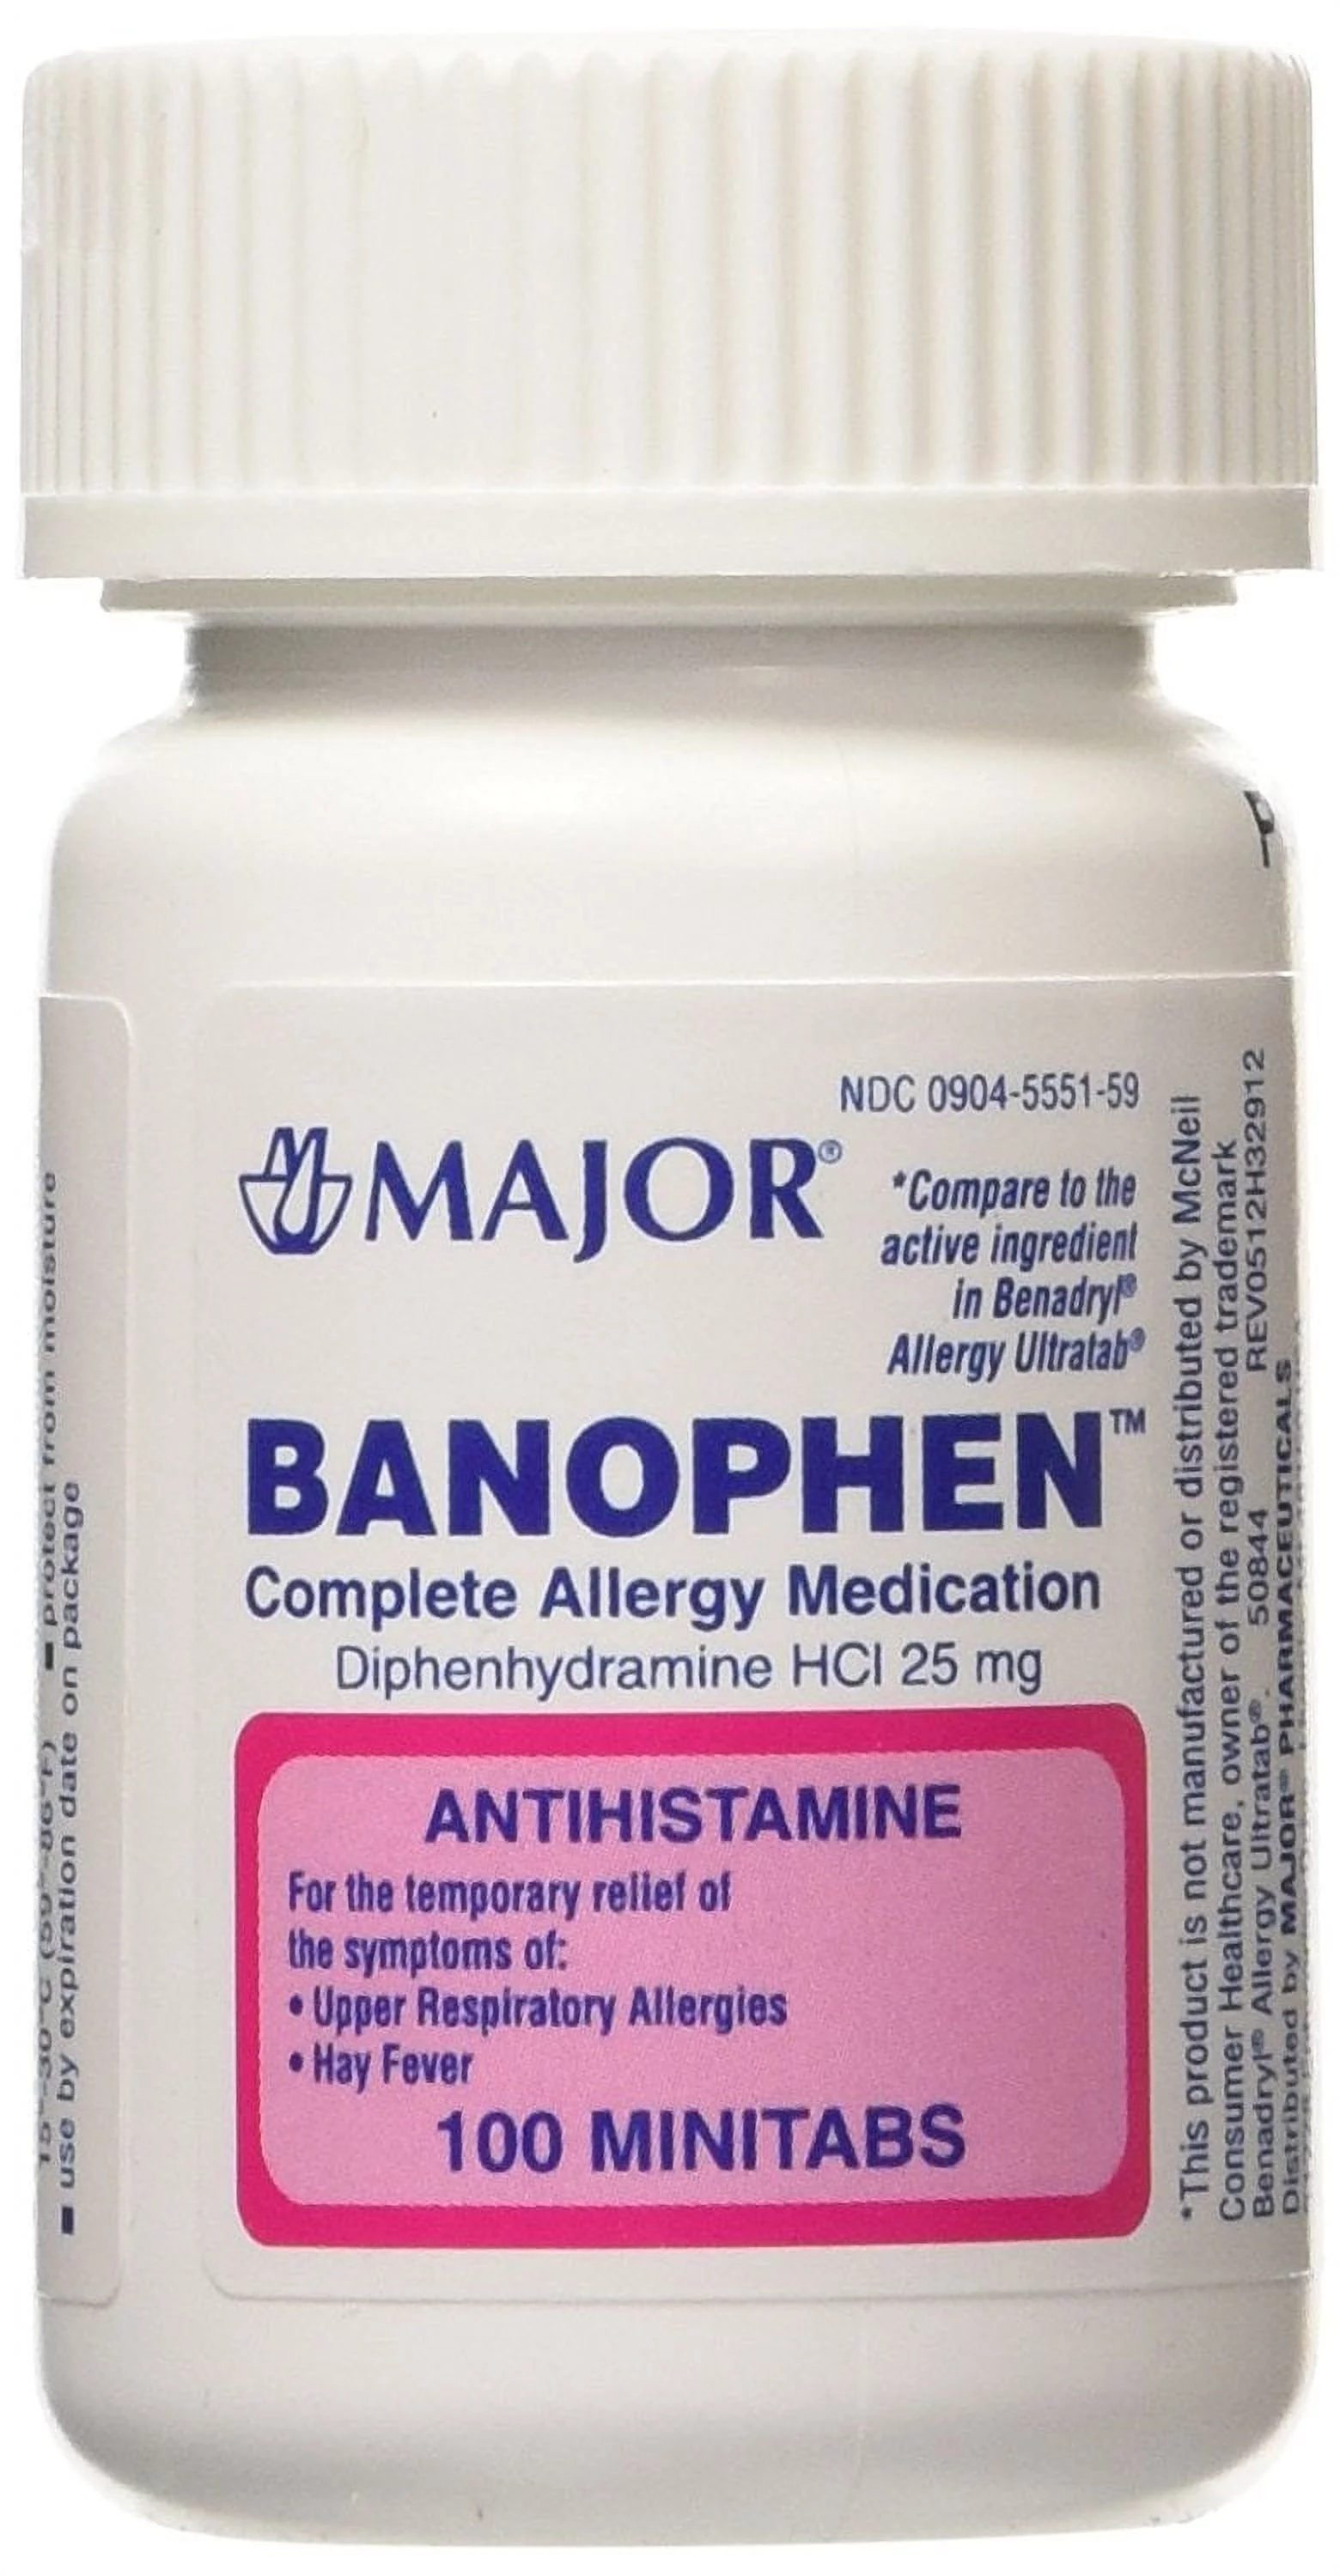 Banophen - Exploring The Uses And Benefits Of Diphenhydramine